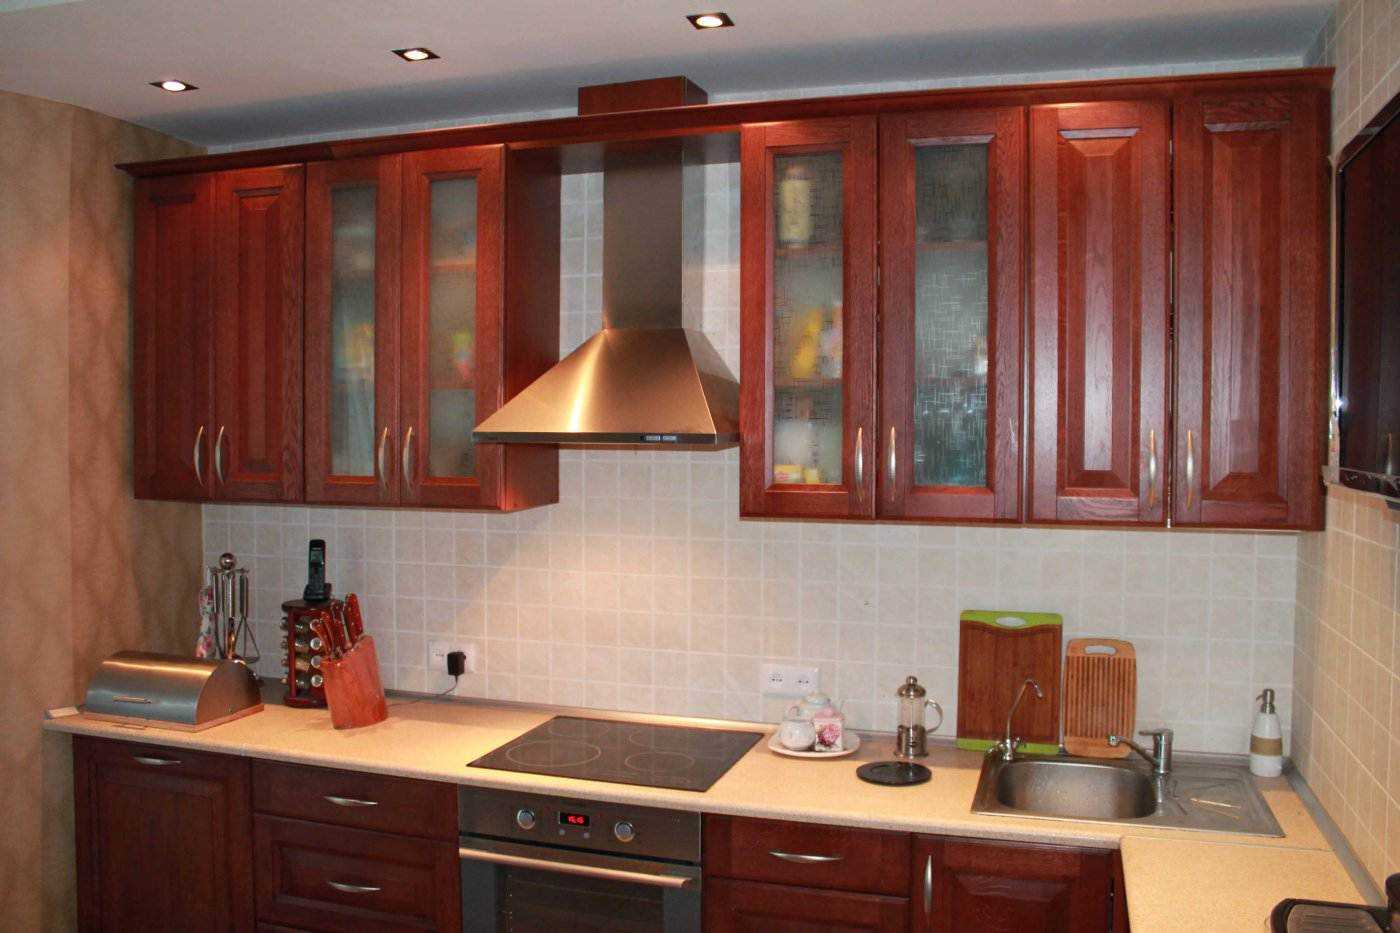 An example of a light kitchen decor of 14 sq.m